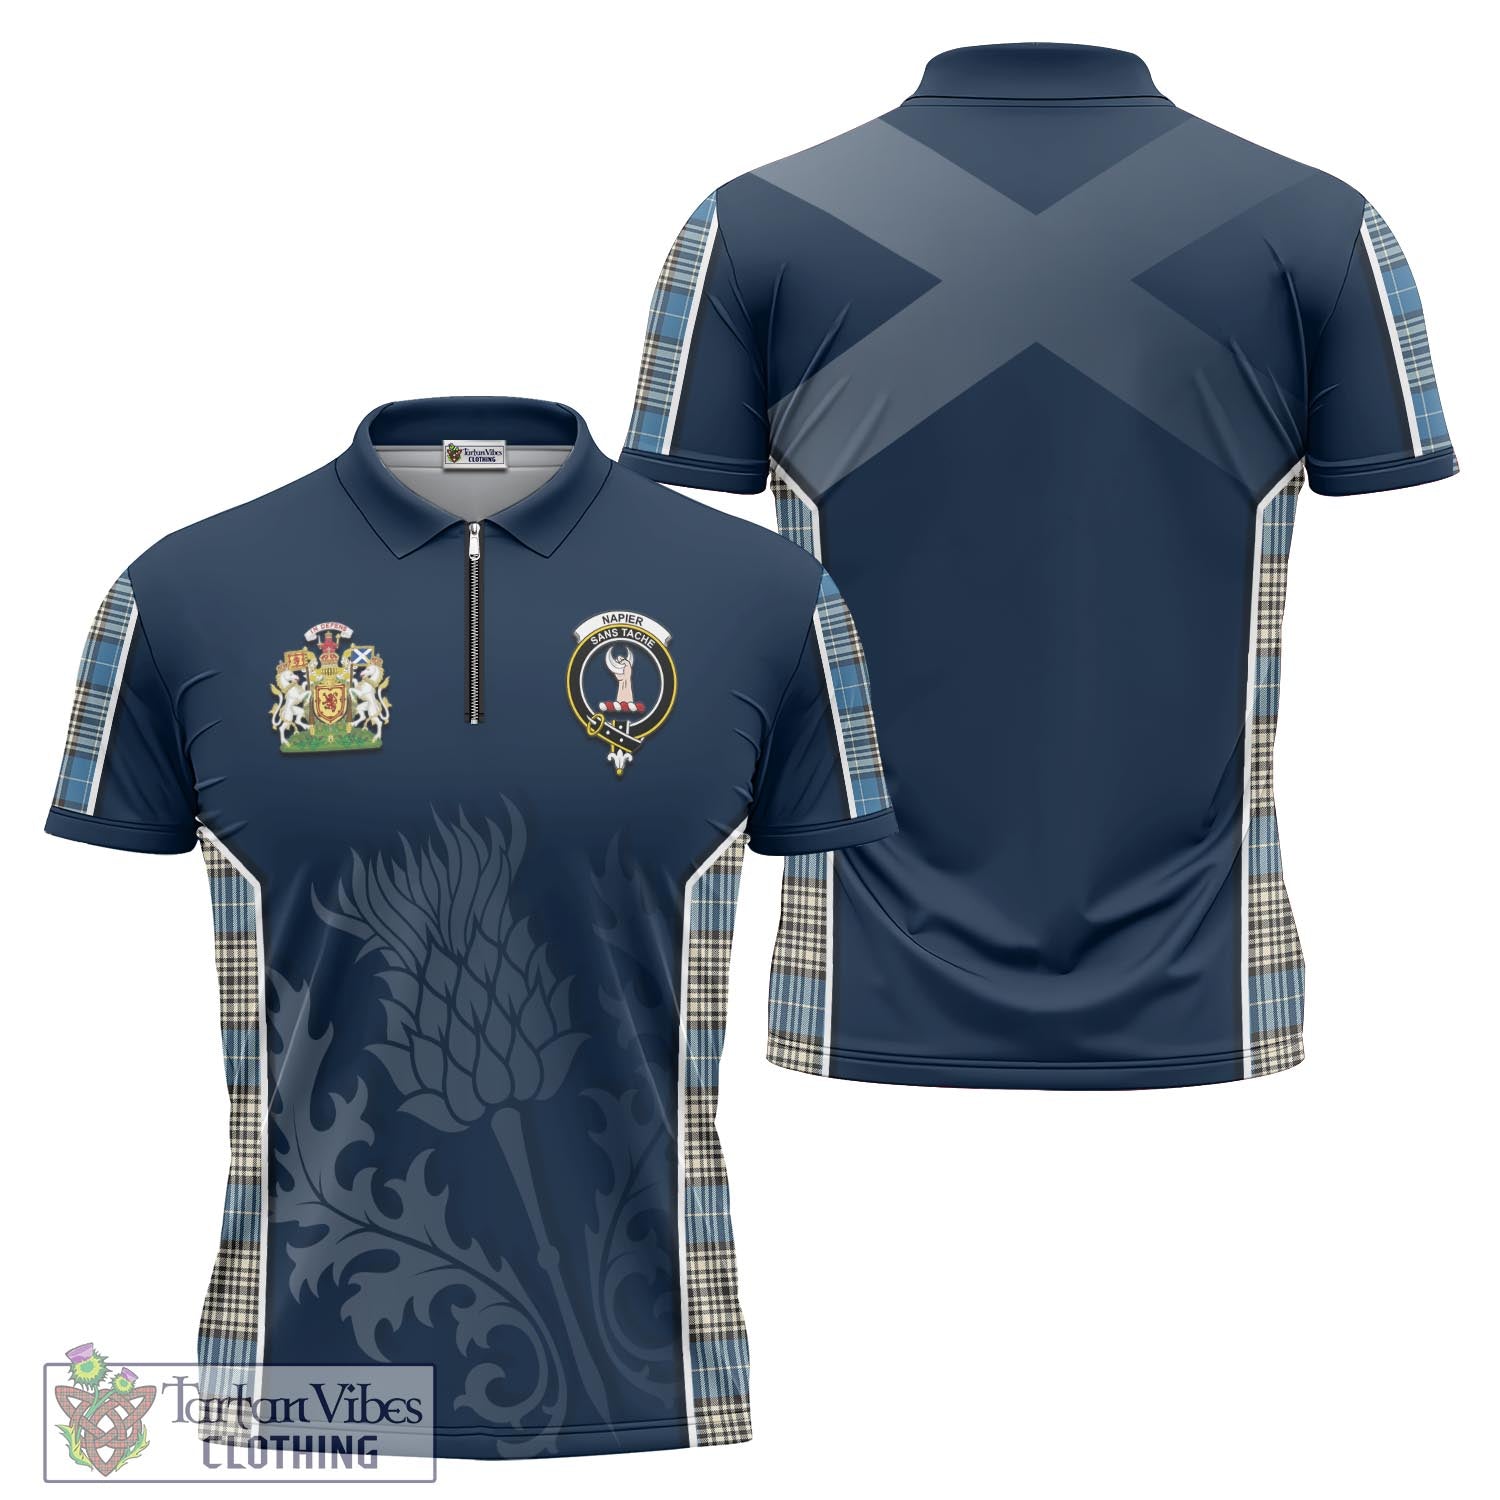 Tartan Vibes Clothing Napier Ancient Tartan Zipper Polo Shirt with Family Crest and Scottish Thistle Vibes Sport Style